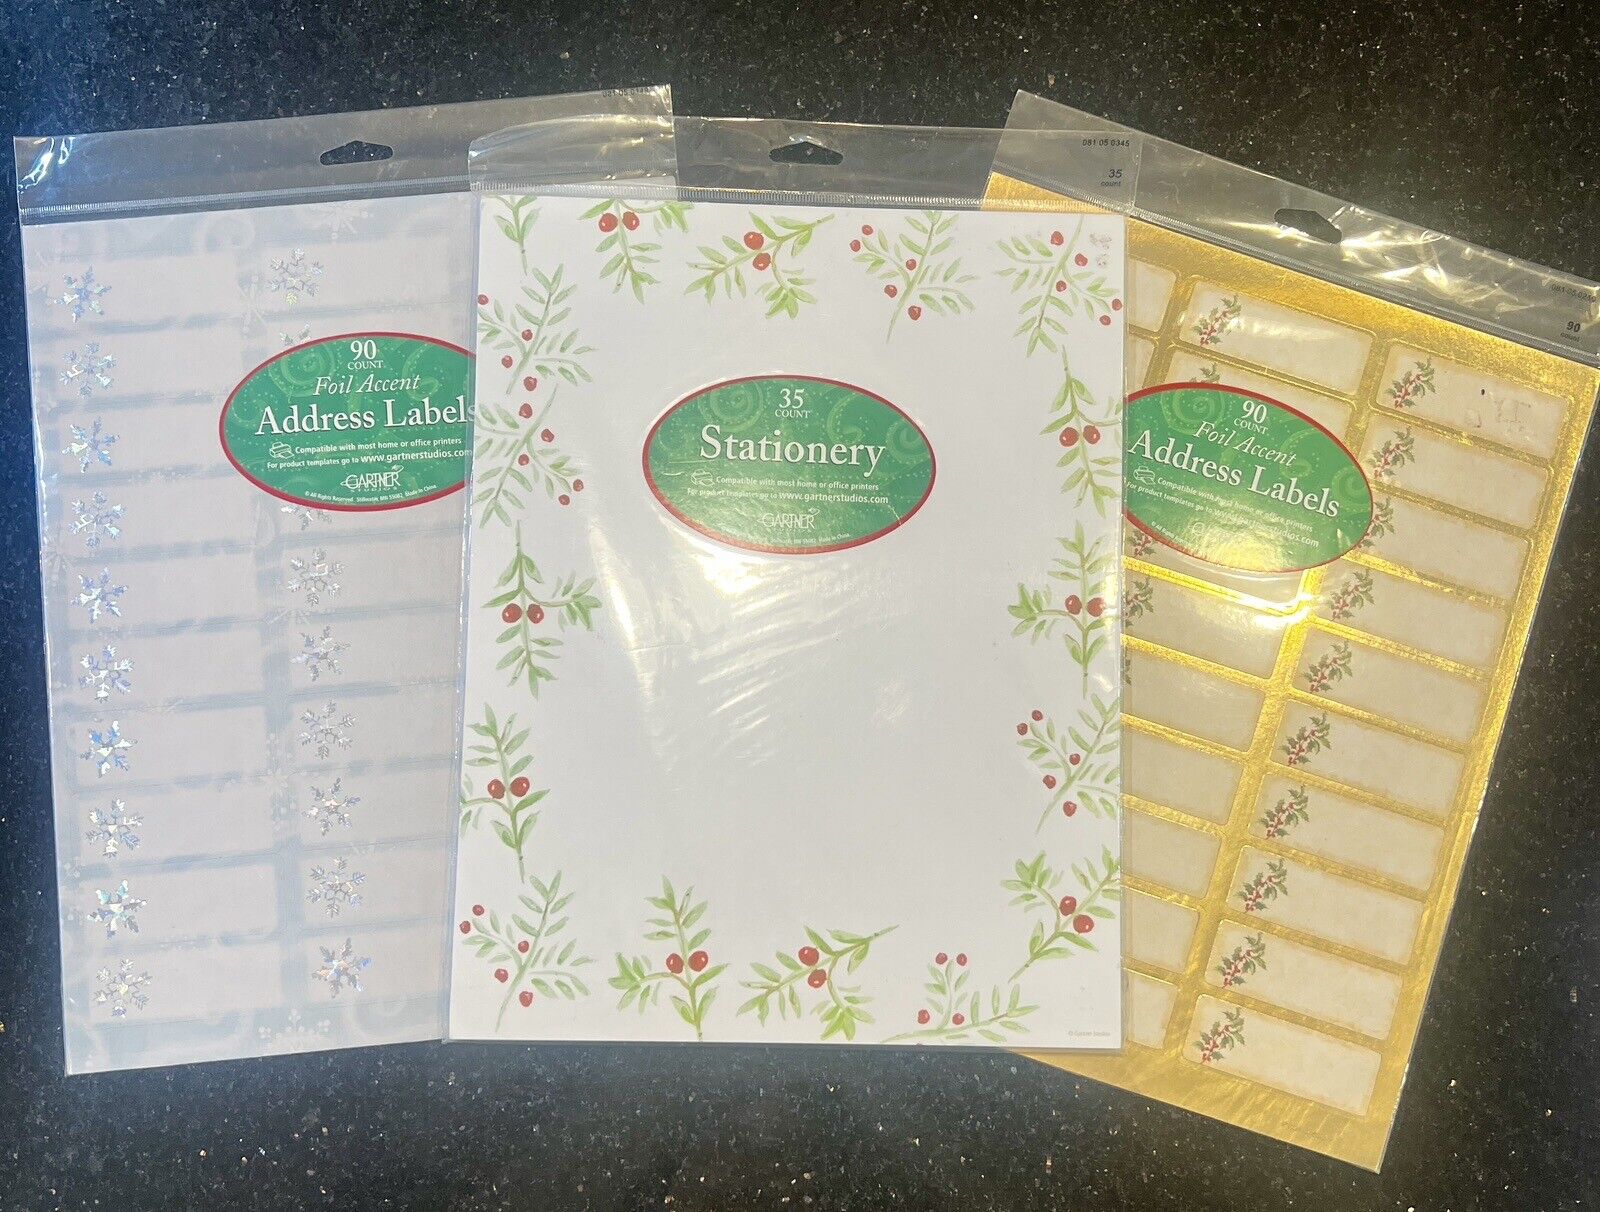 Brand New Gartner Studios Painted Holly Stationery 35 Ct. + Free Labels